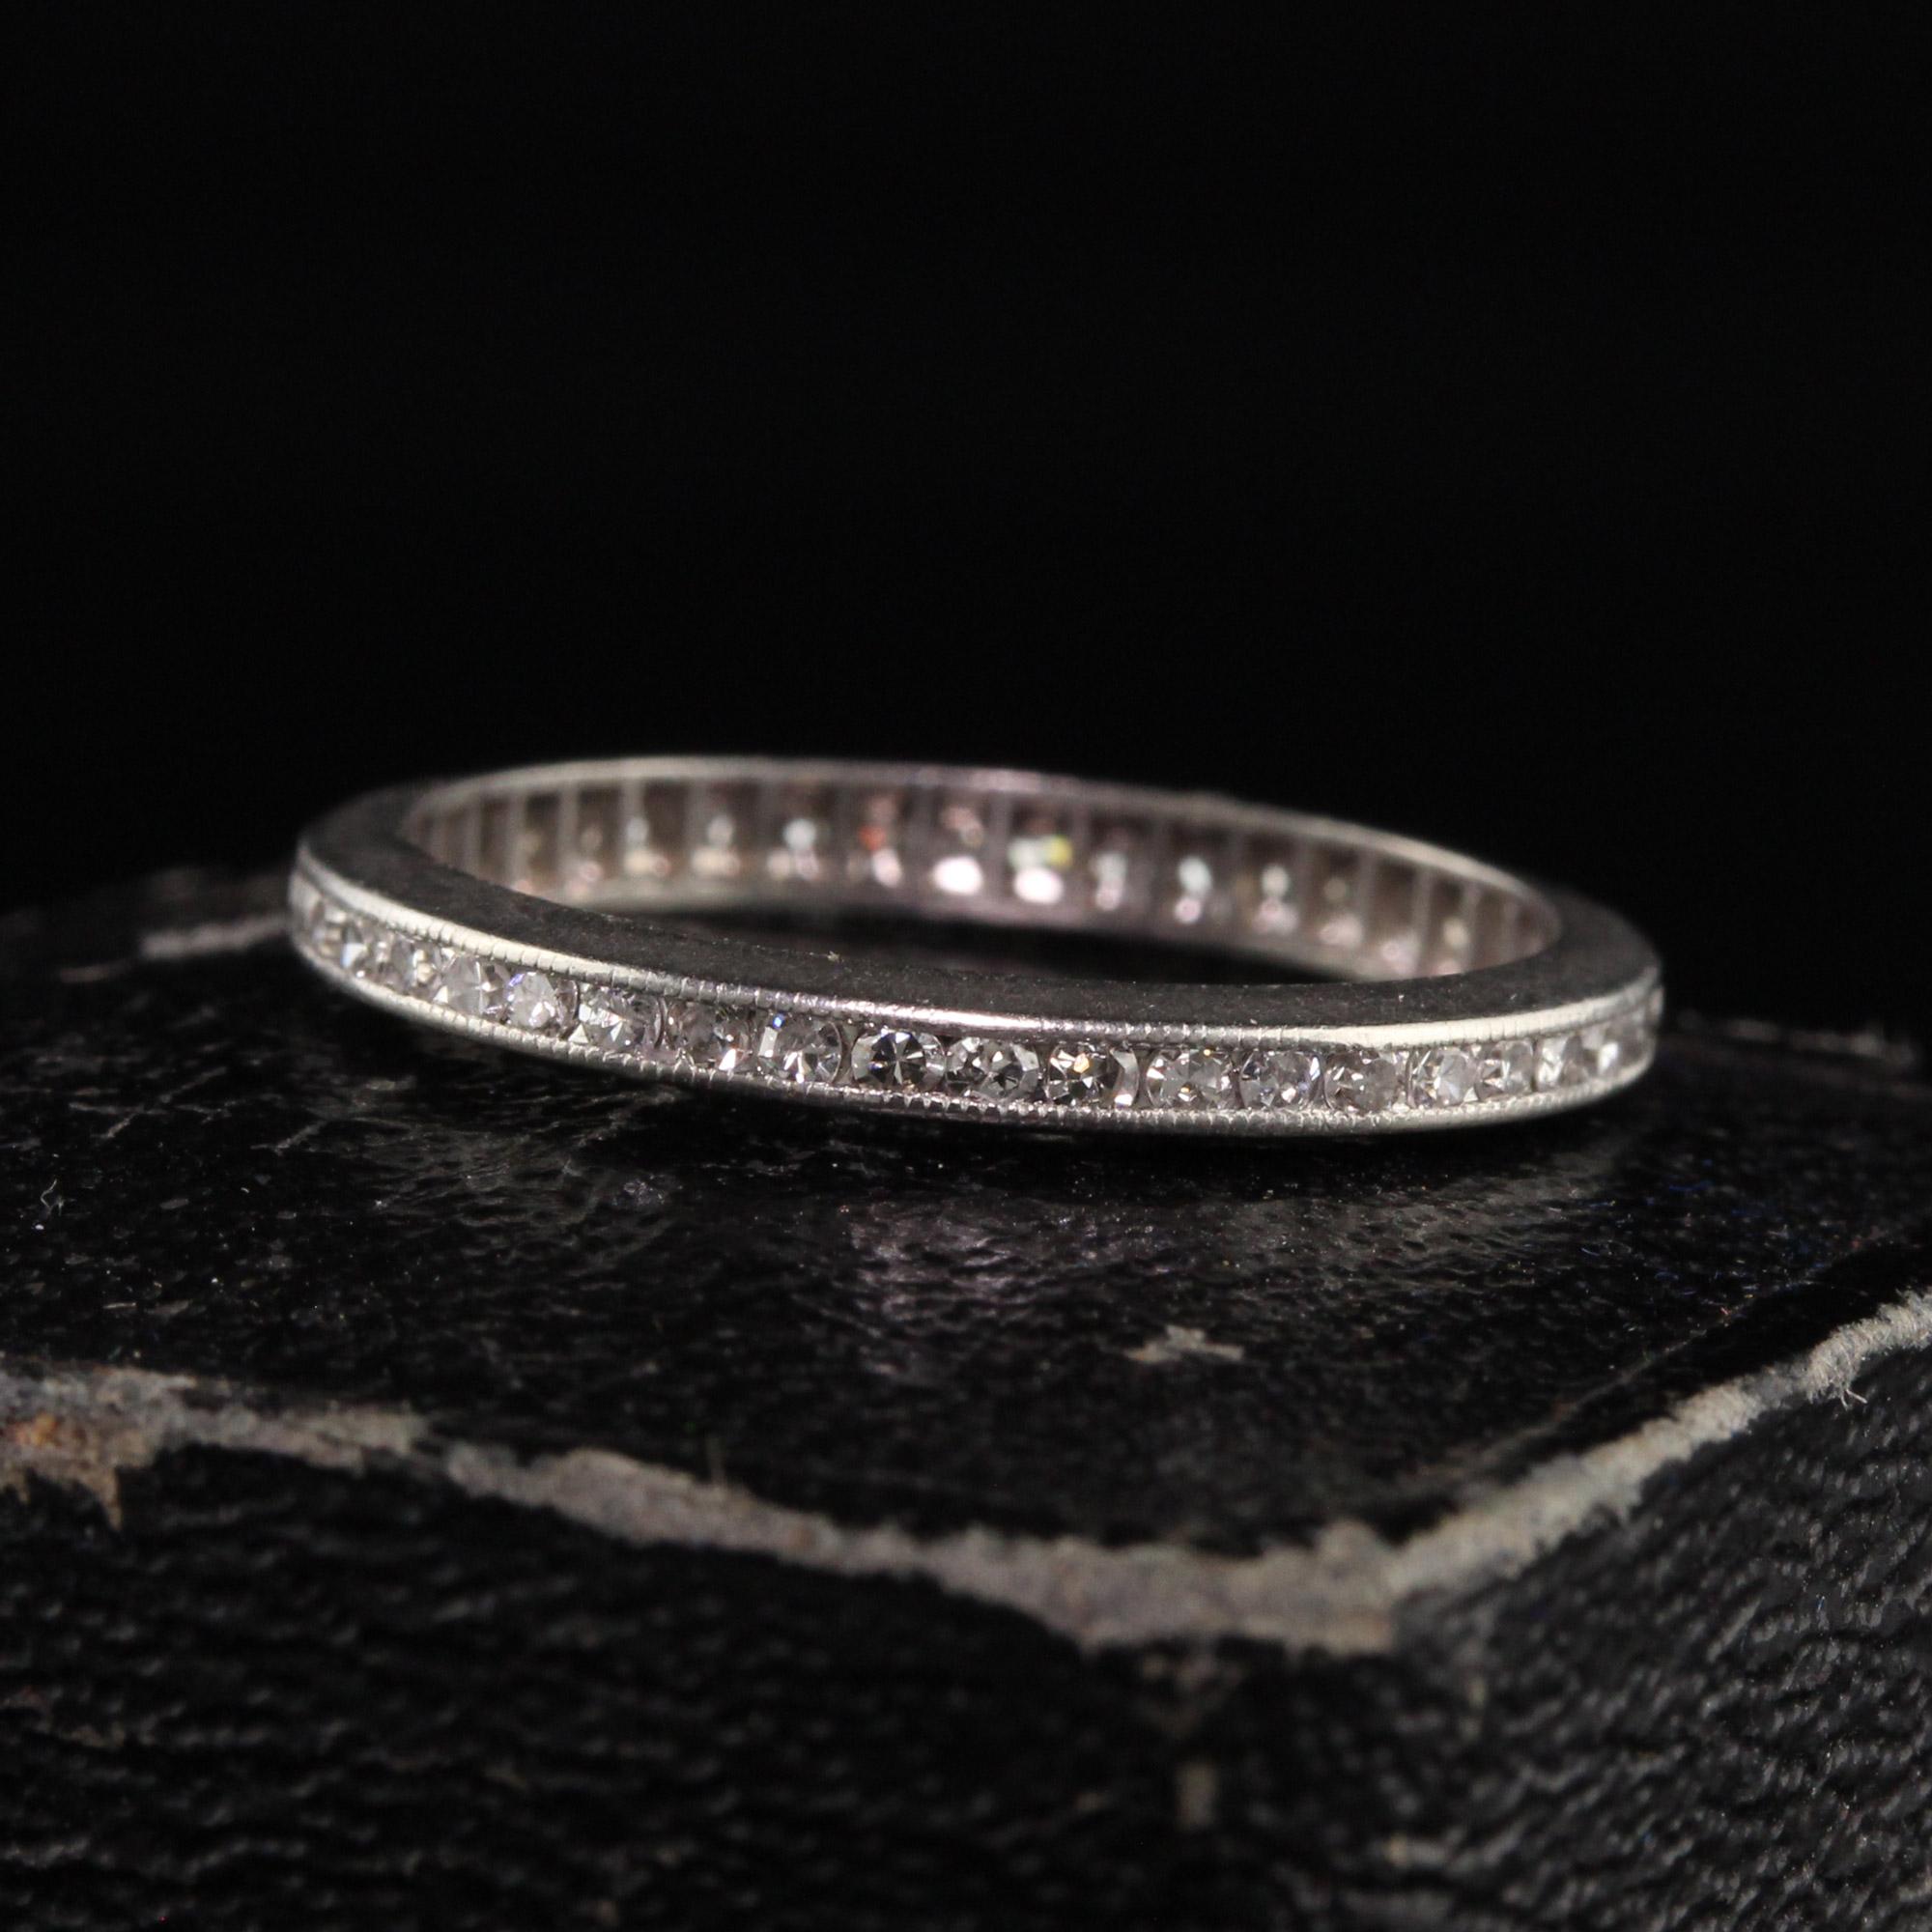 Beautiful Antique Art Deco Platinum Single Cut Diamond Eternity Band. This classic eternity band is crafted in platinum and has single cut diamonds going around the entire ring. It is in great condition.

Item #R1177

Metal: Platinum

Weight: 1.4